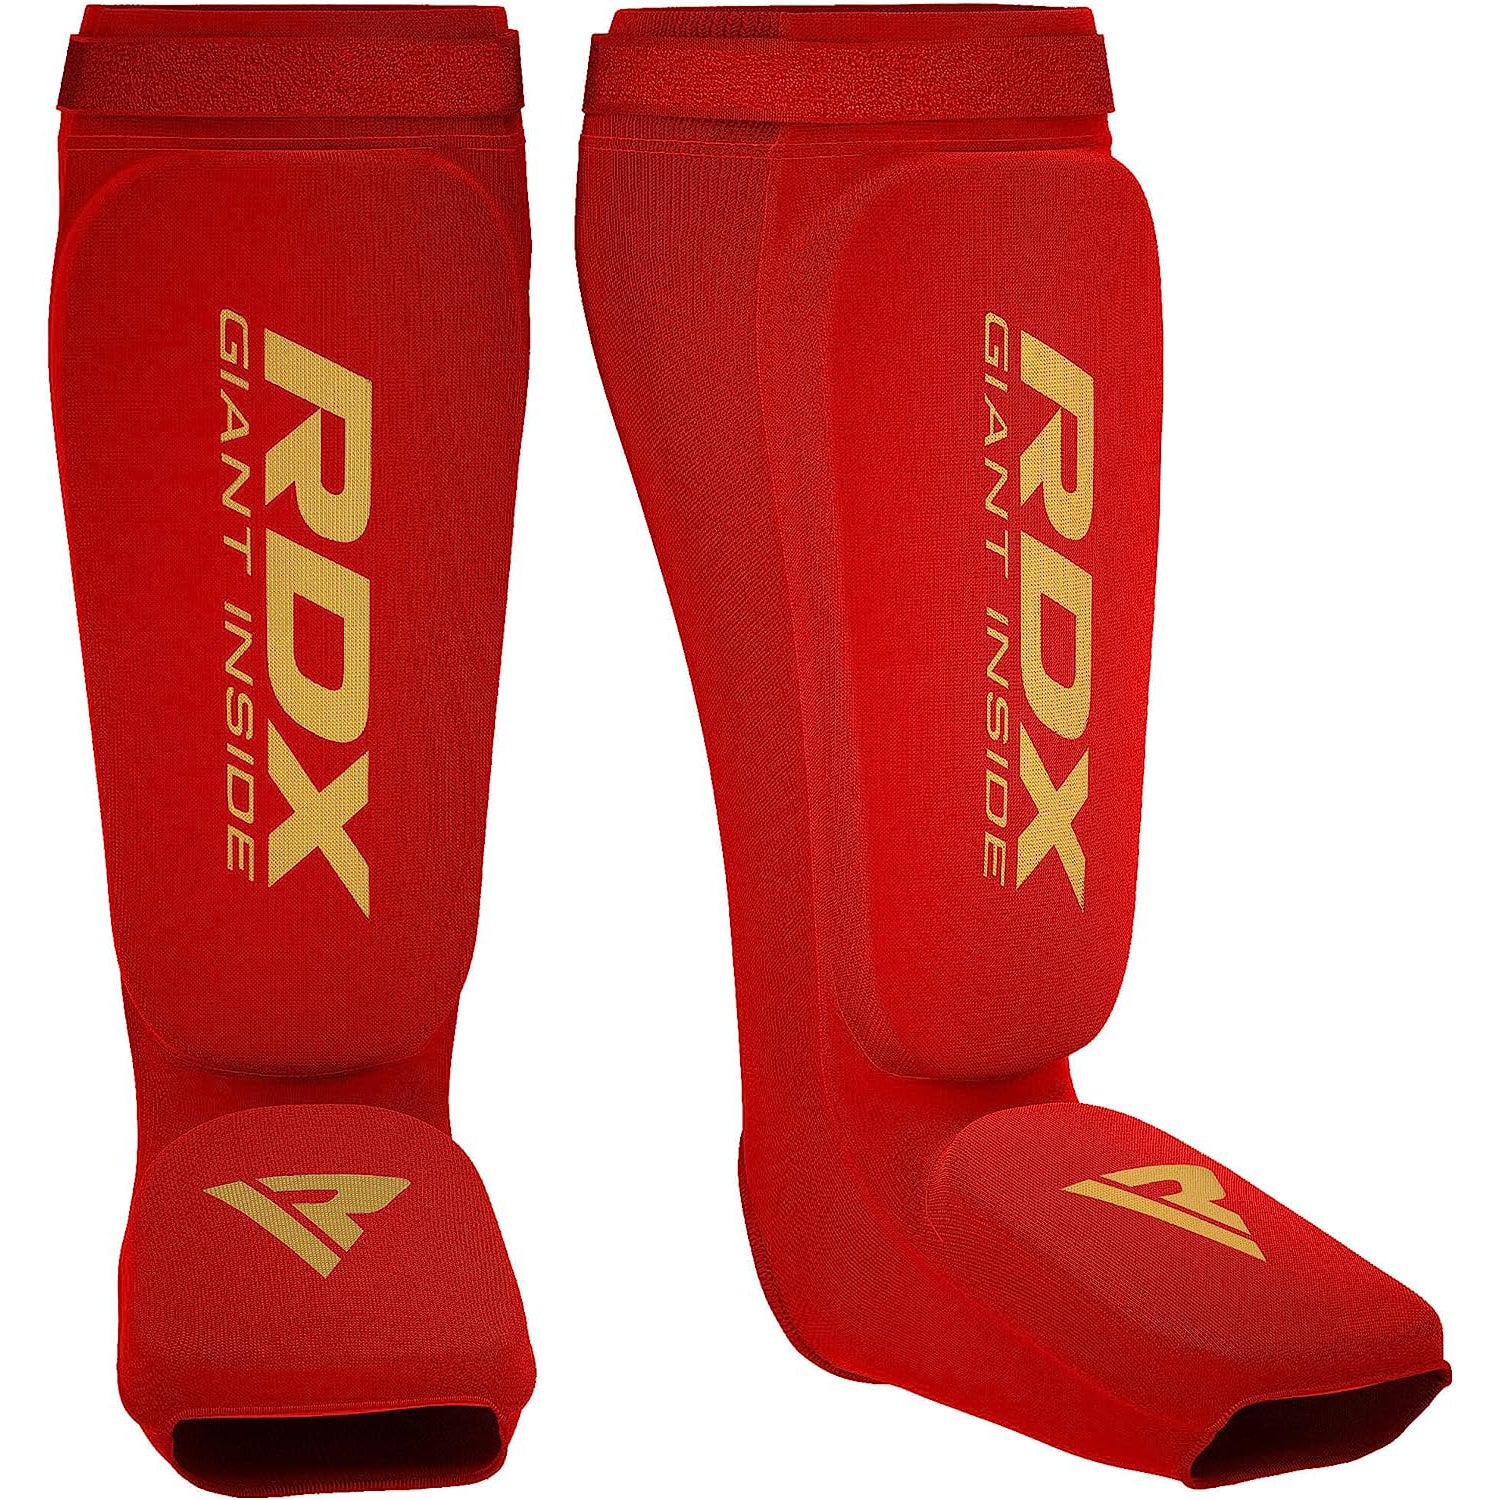 RDX SI Gel Padded Shin Guards Leg Instep Protection Pads for MMA, BJJ, Kickboxing, Muay Thai, Training - RED - EXTRA LARGE - Pro-Distributing